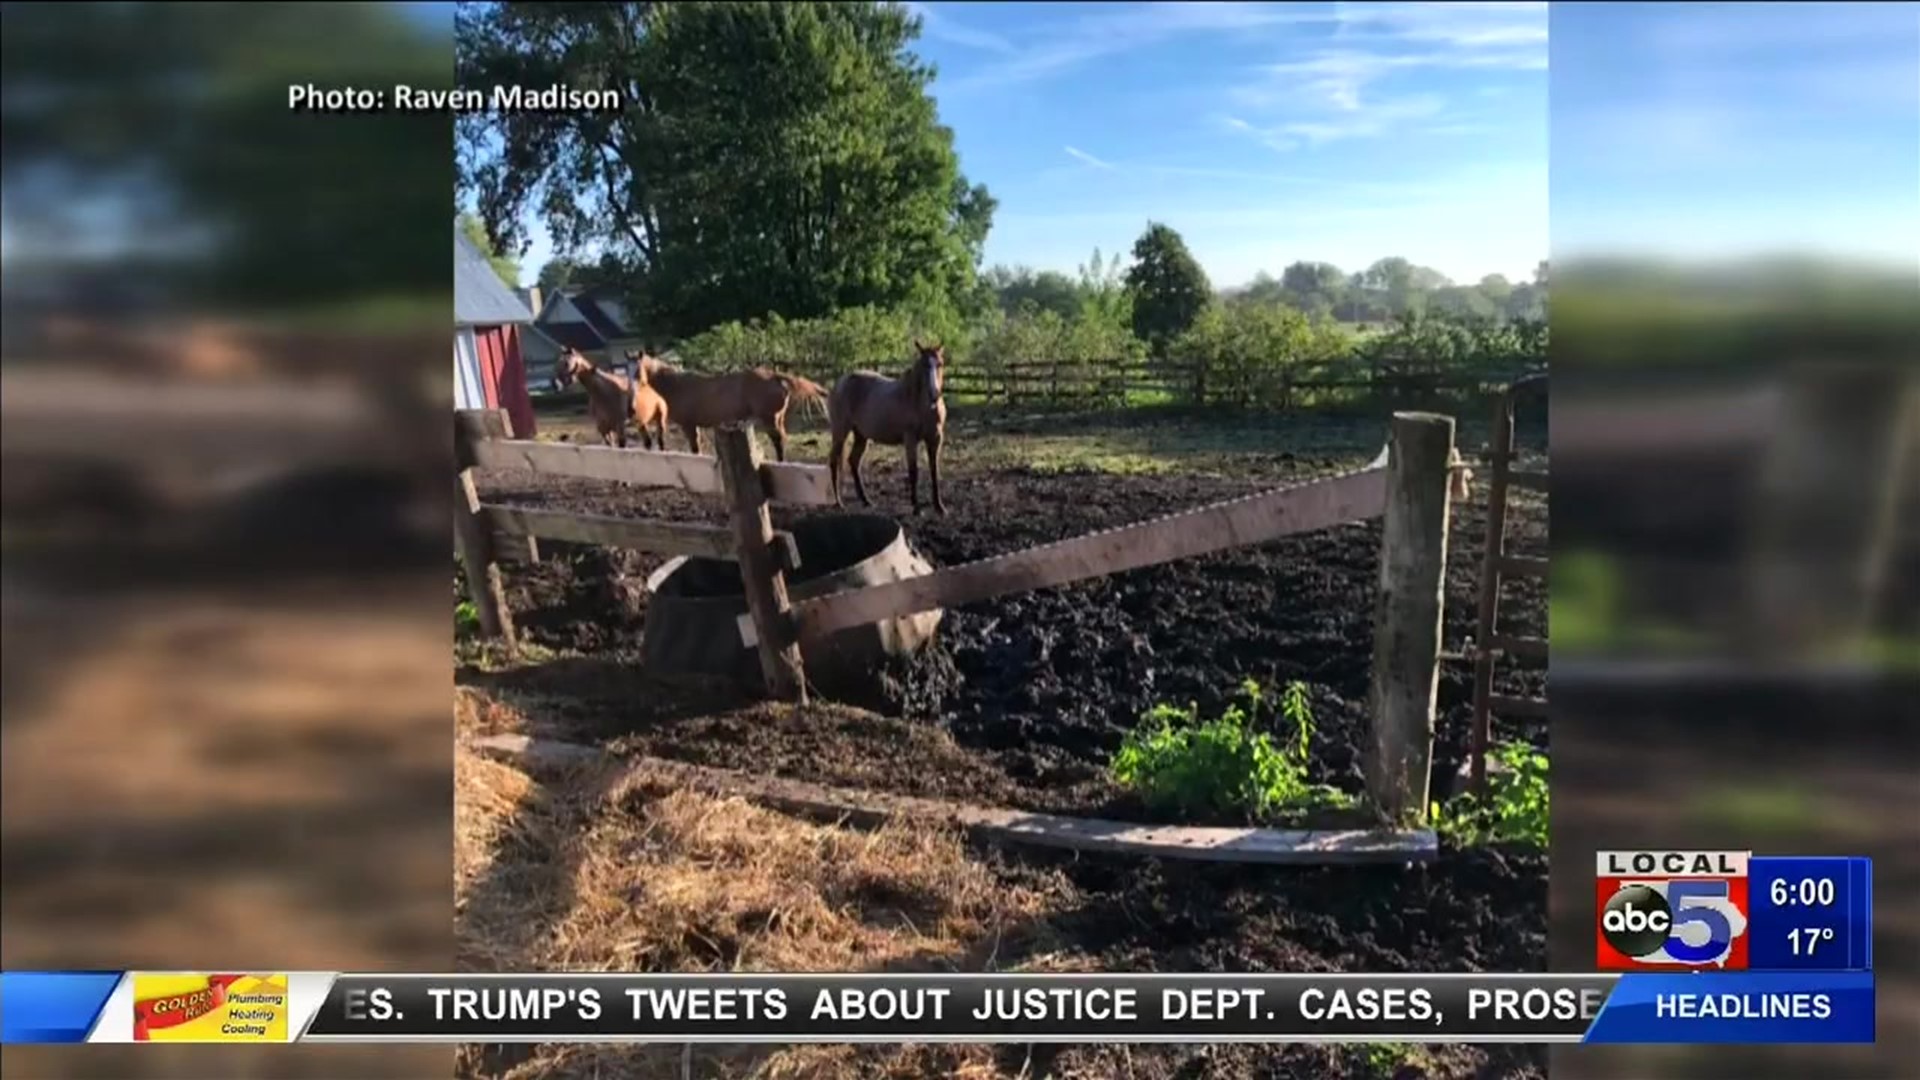 'There is something wrong here': More voice concerns about 60+ horses at Dallas County farm